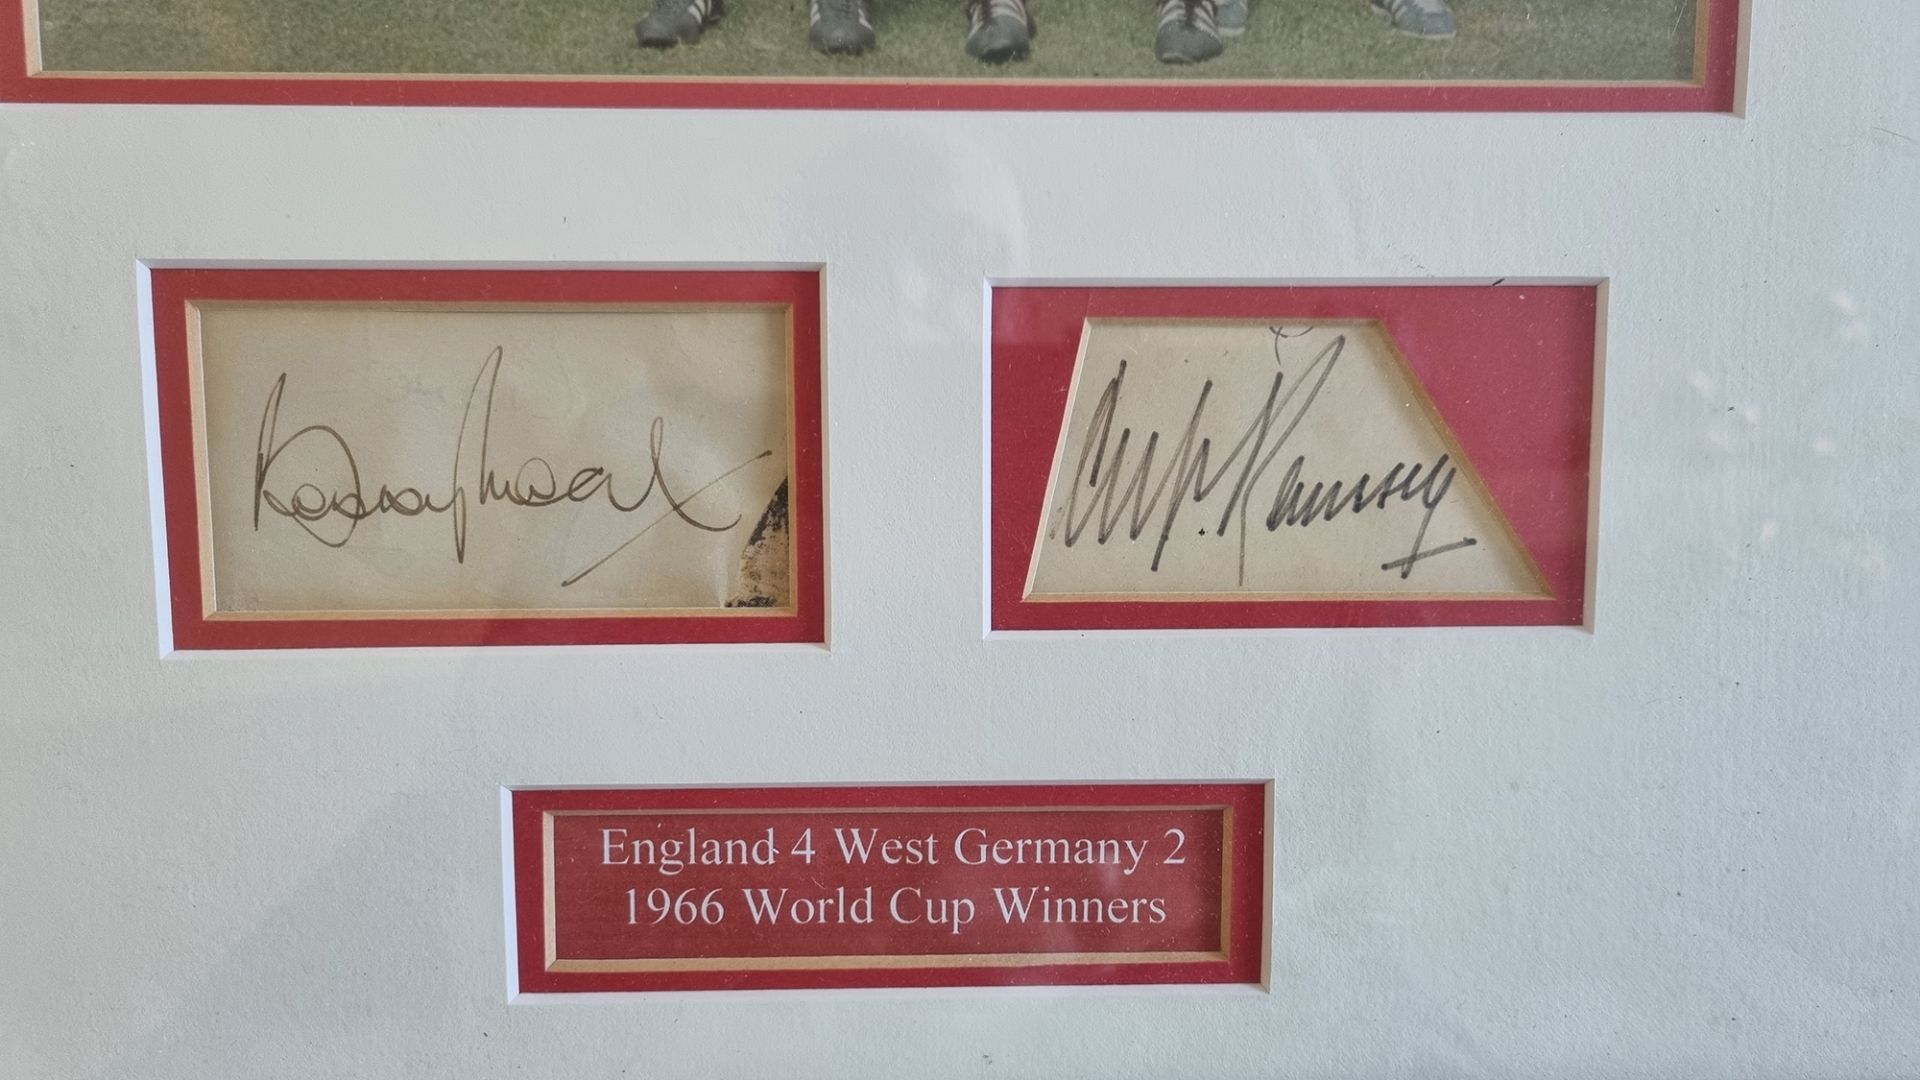 1966 England World Cup Full Team Signatures inc Alf Ramsay - Image 2 of 3